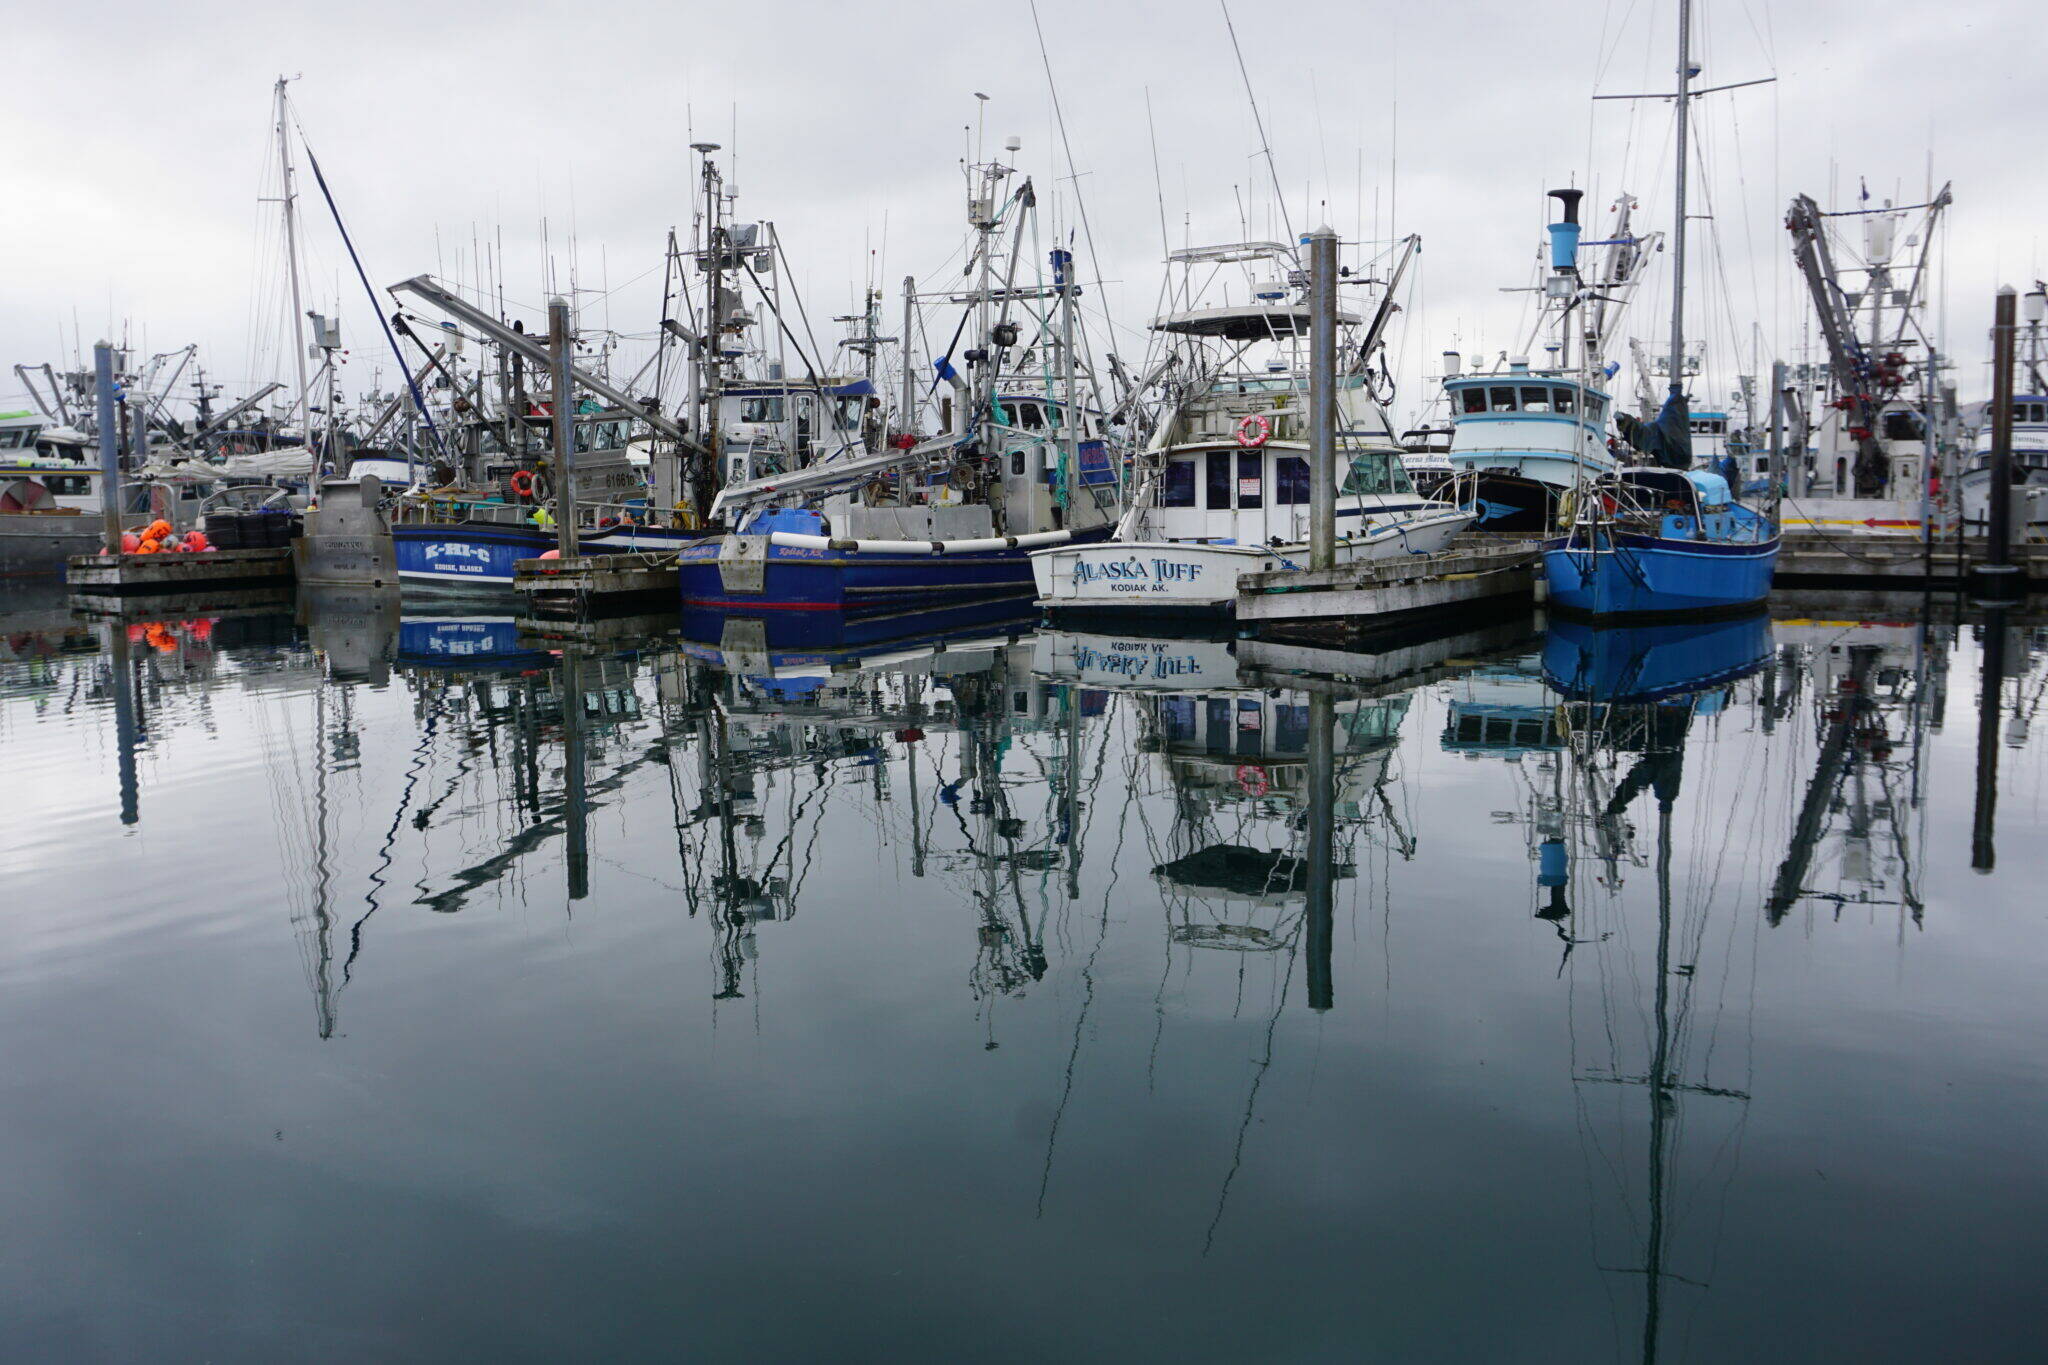 Fishing boats are lines up on Oct. 3, 2022, at a dock at Kodiak’s St. Paul Harbor. Commercial fishing injuries and illnessness are not covered by workers’ compensation, so a state-managed Fishermen’s Fund serves as backstop payor for medical costs. A newly passed bill, if signed by the governor, would increase maximum allowable payments from the fund. (Yereth Rosen/Alaska Beacon)